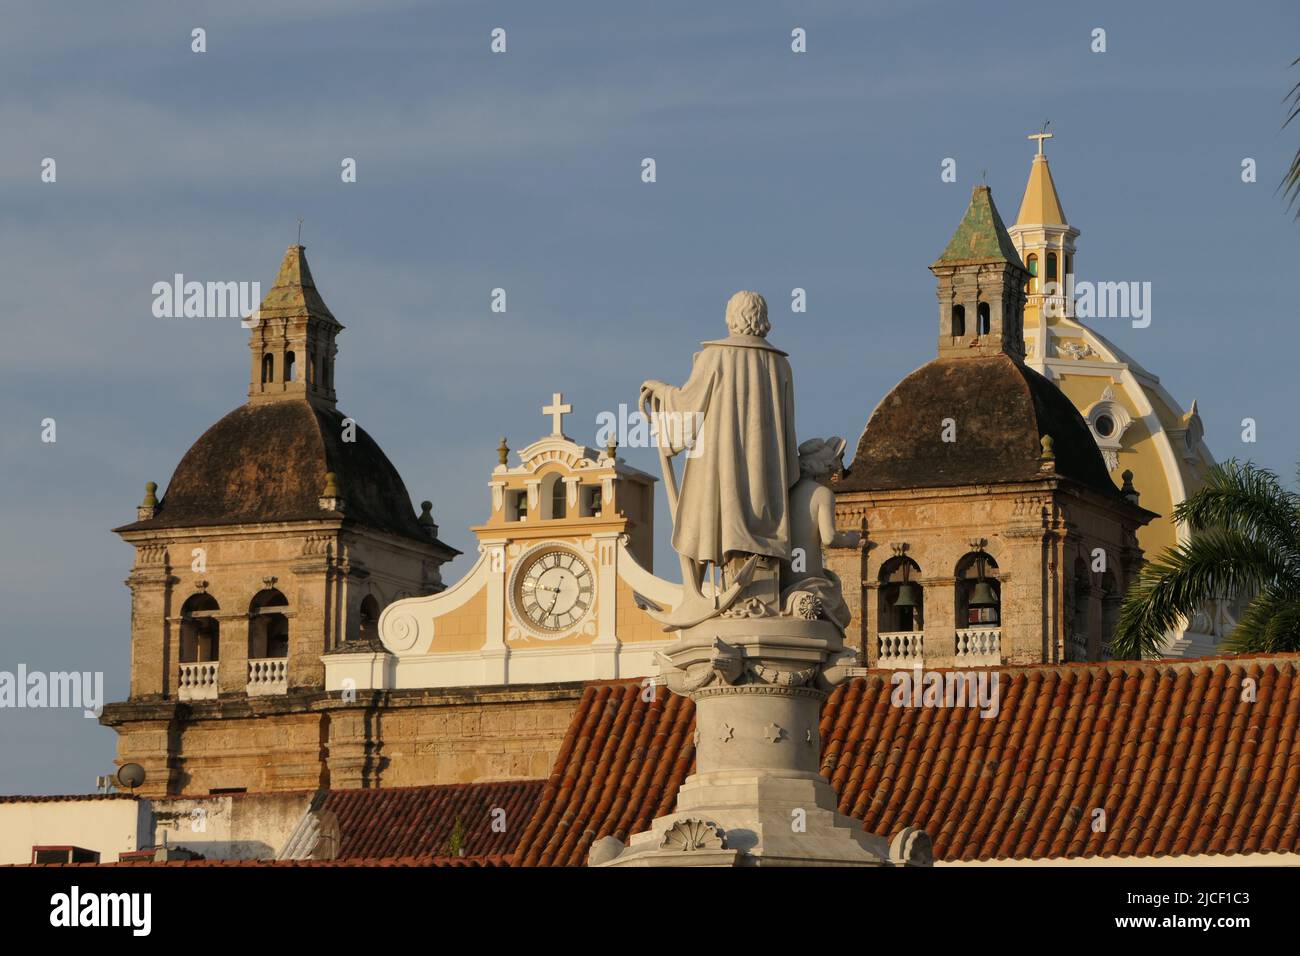 Close-up view over roofs in Cartagena with statue and bell towers of church San Pedro Claver Stock Photo